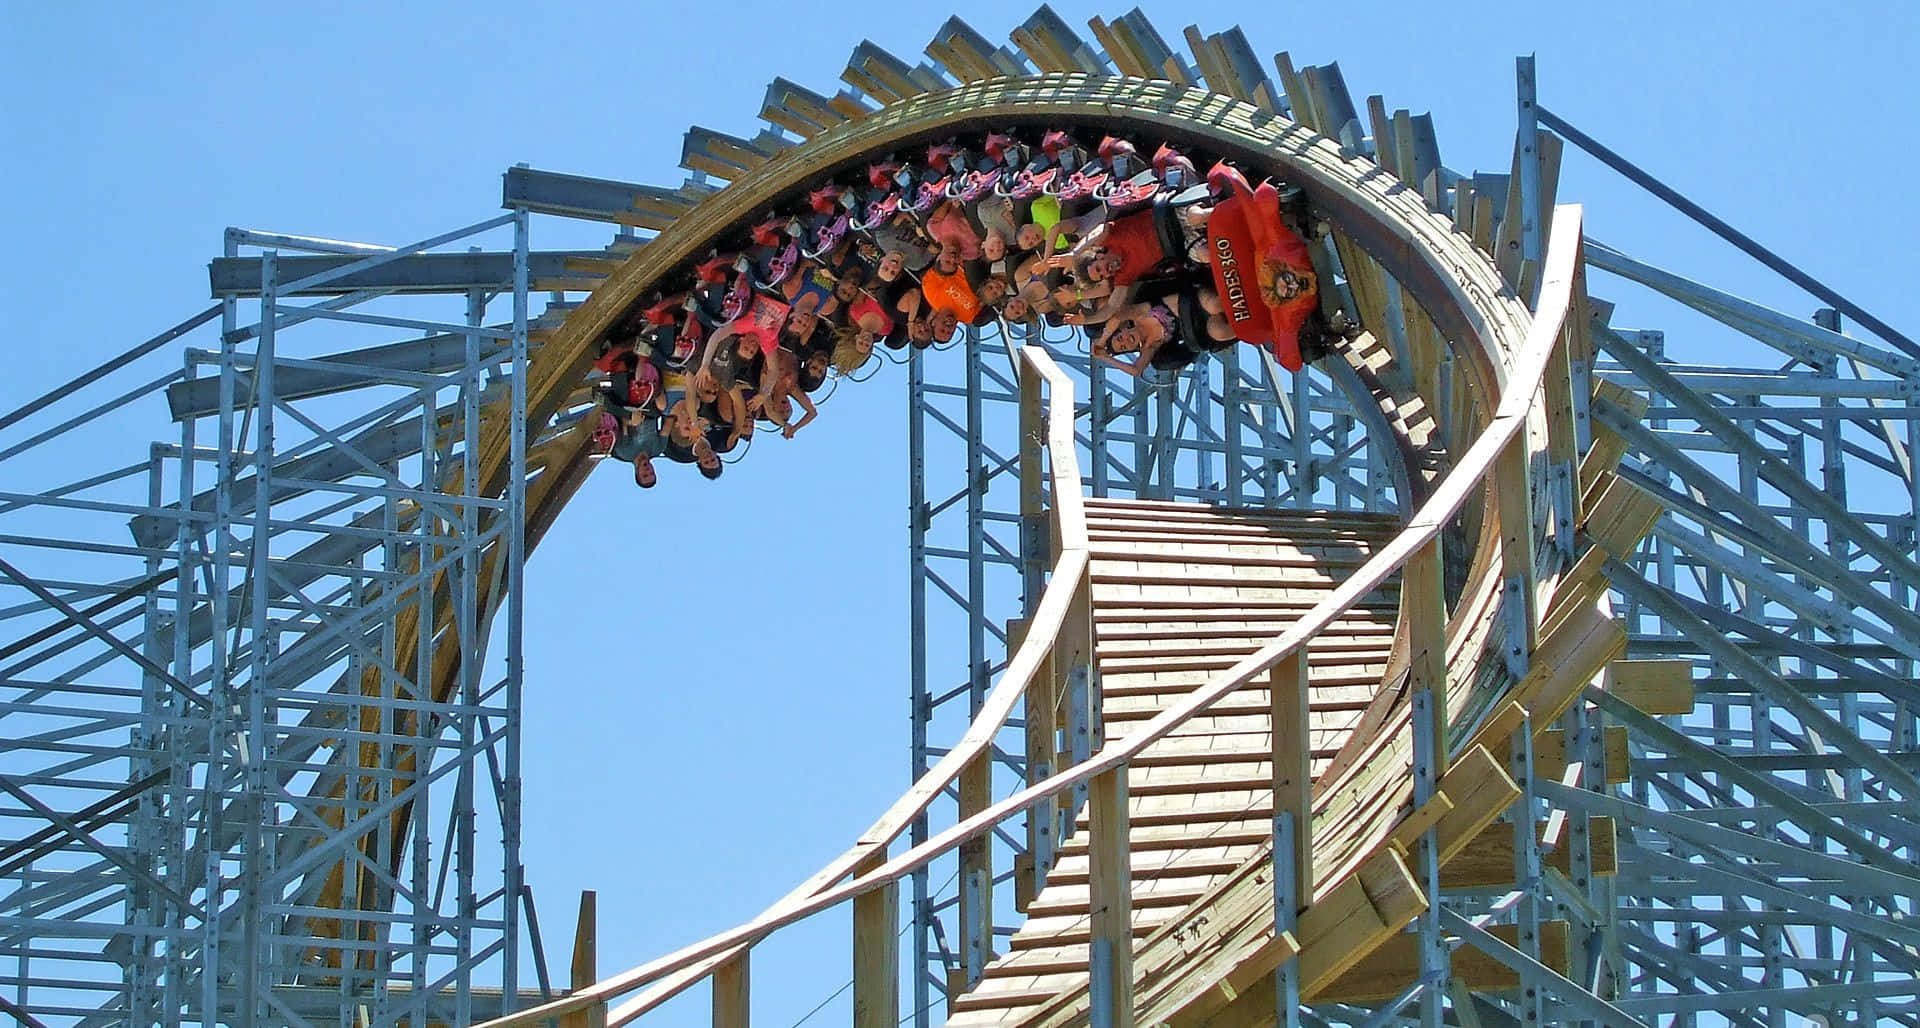 Get ready for the thrill of a lifetime on this amazing roller coaster!